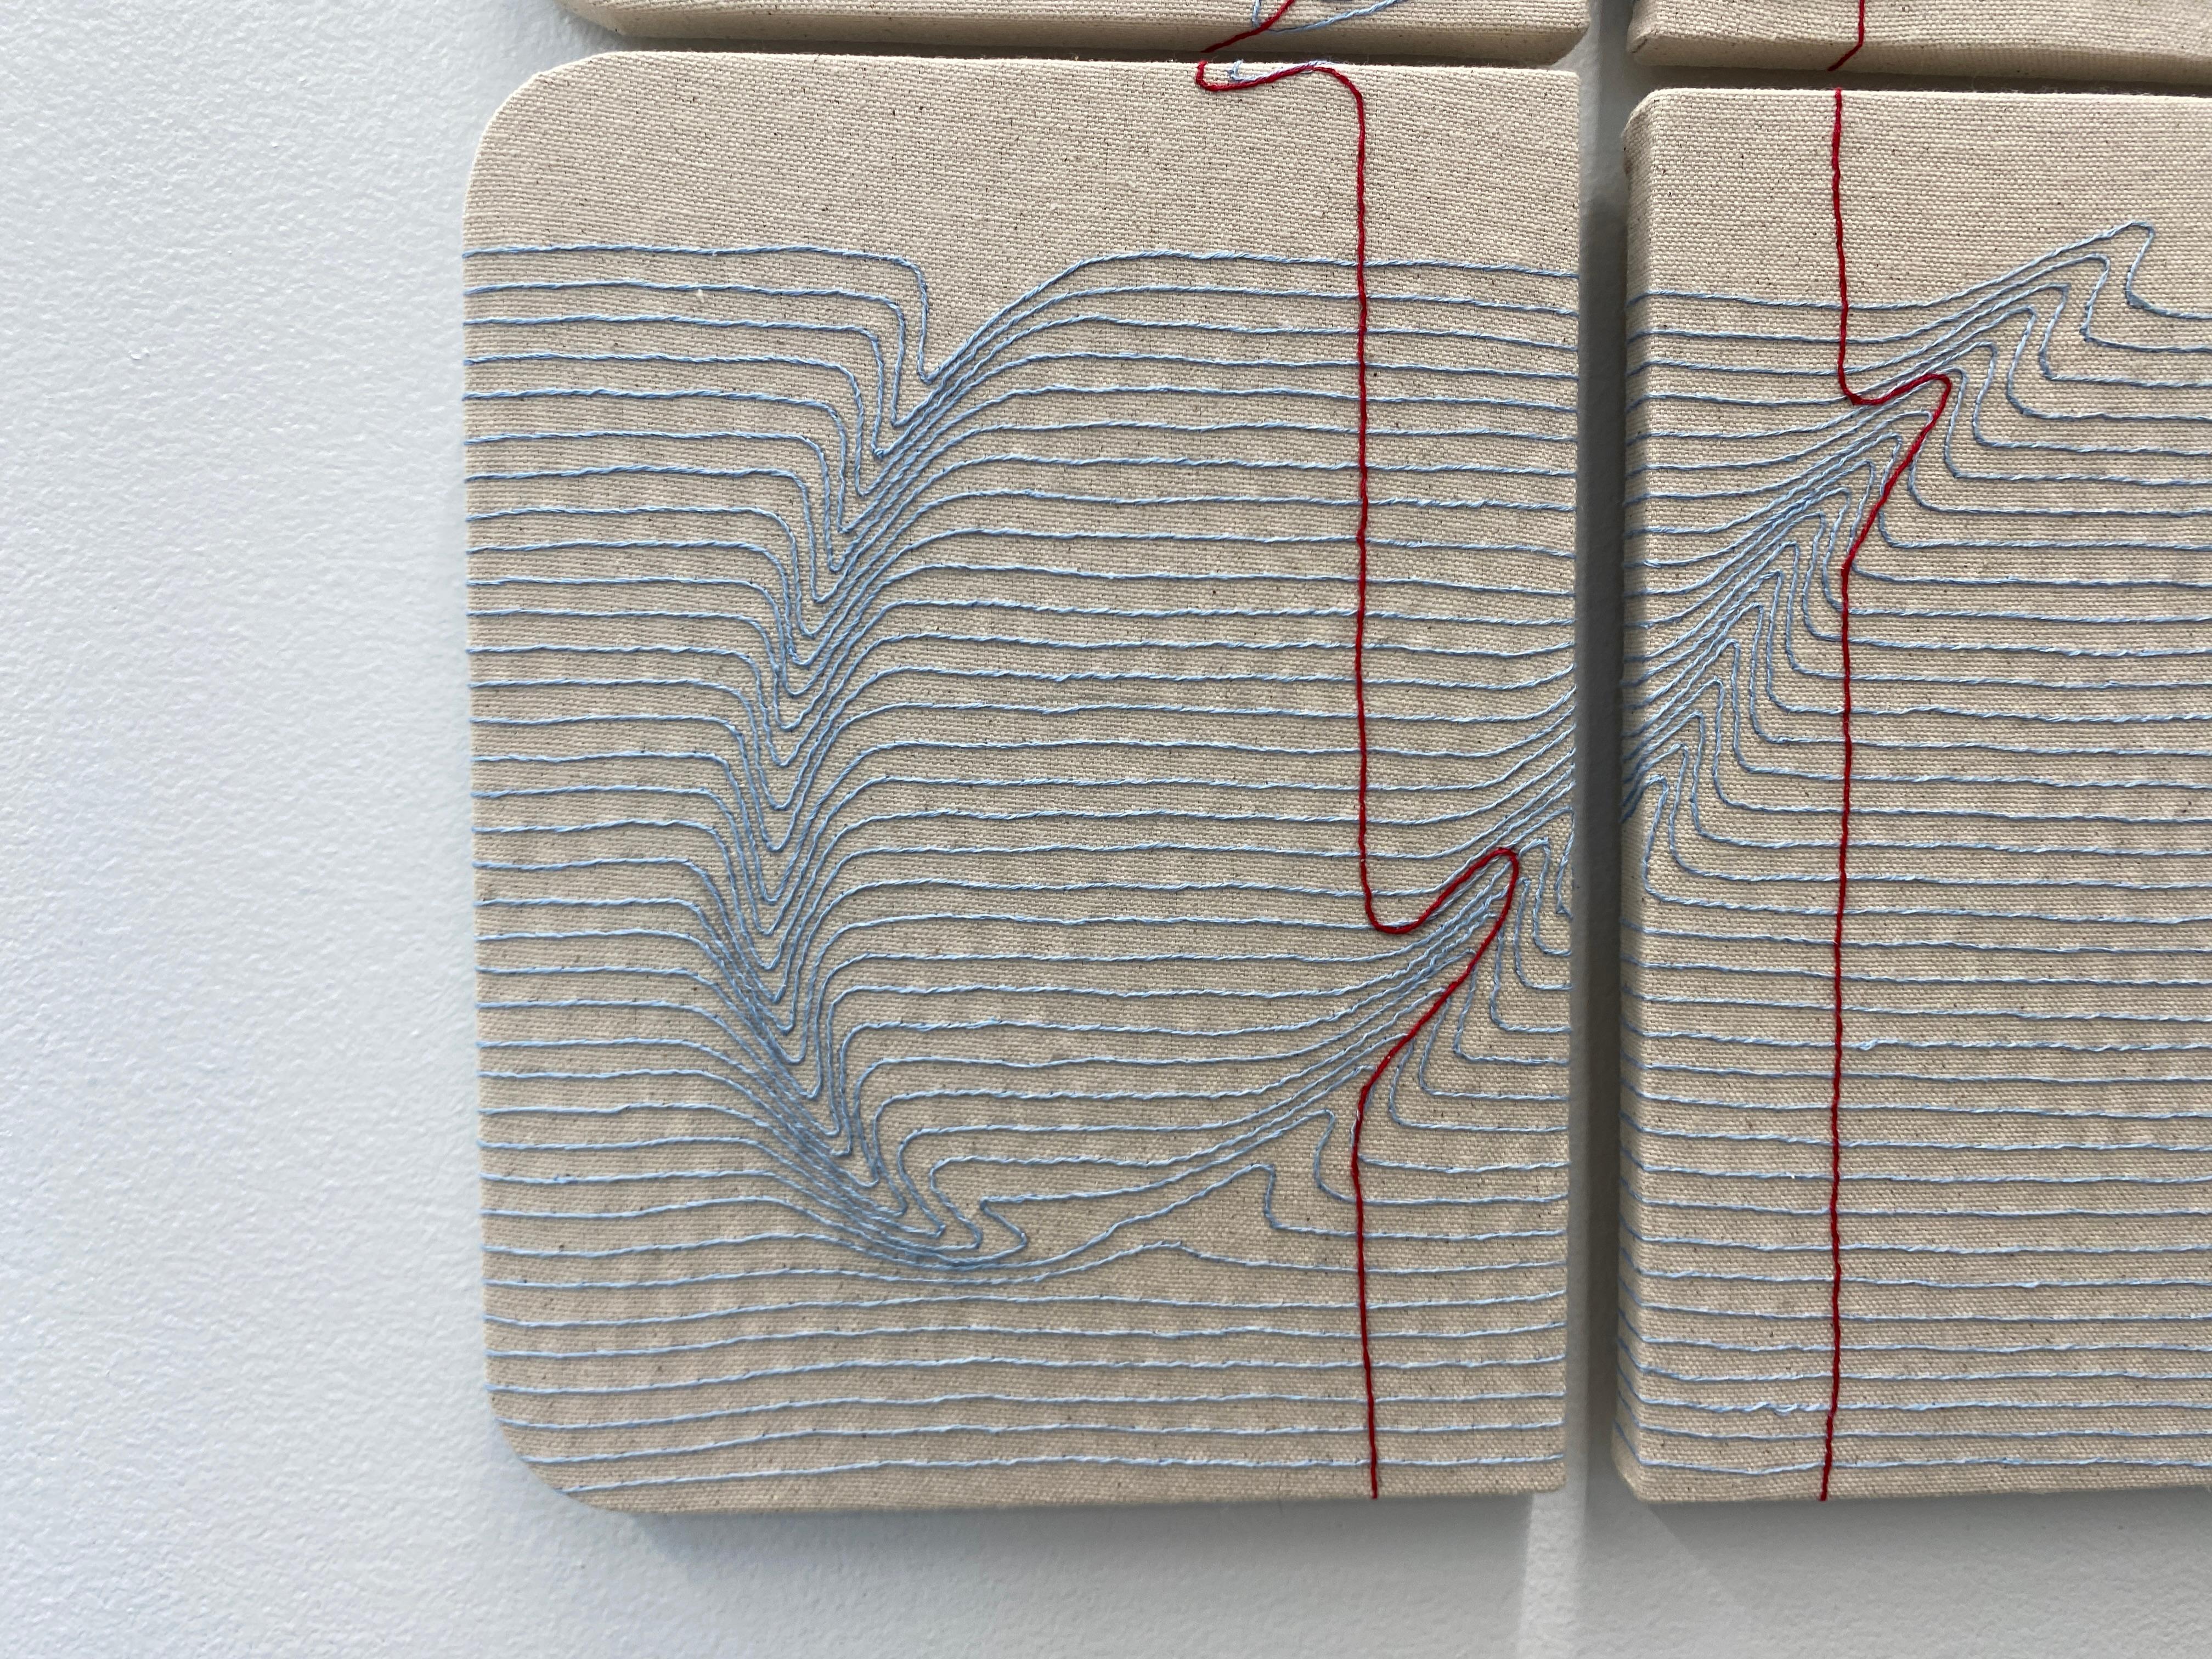 Notes for String Theory 11272022 by Candace Hicks consists of an arrangement of four hand-embroidered canvas panels. Part of a larger series of work, Notes for String Theory focuses on literary coincidence and Hicks’ fascination with the phenomenon